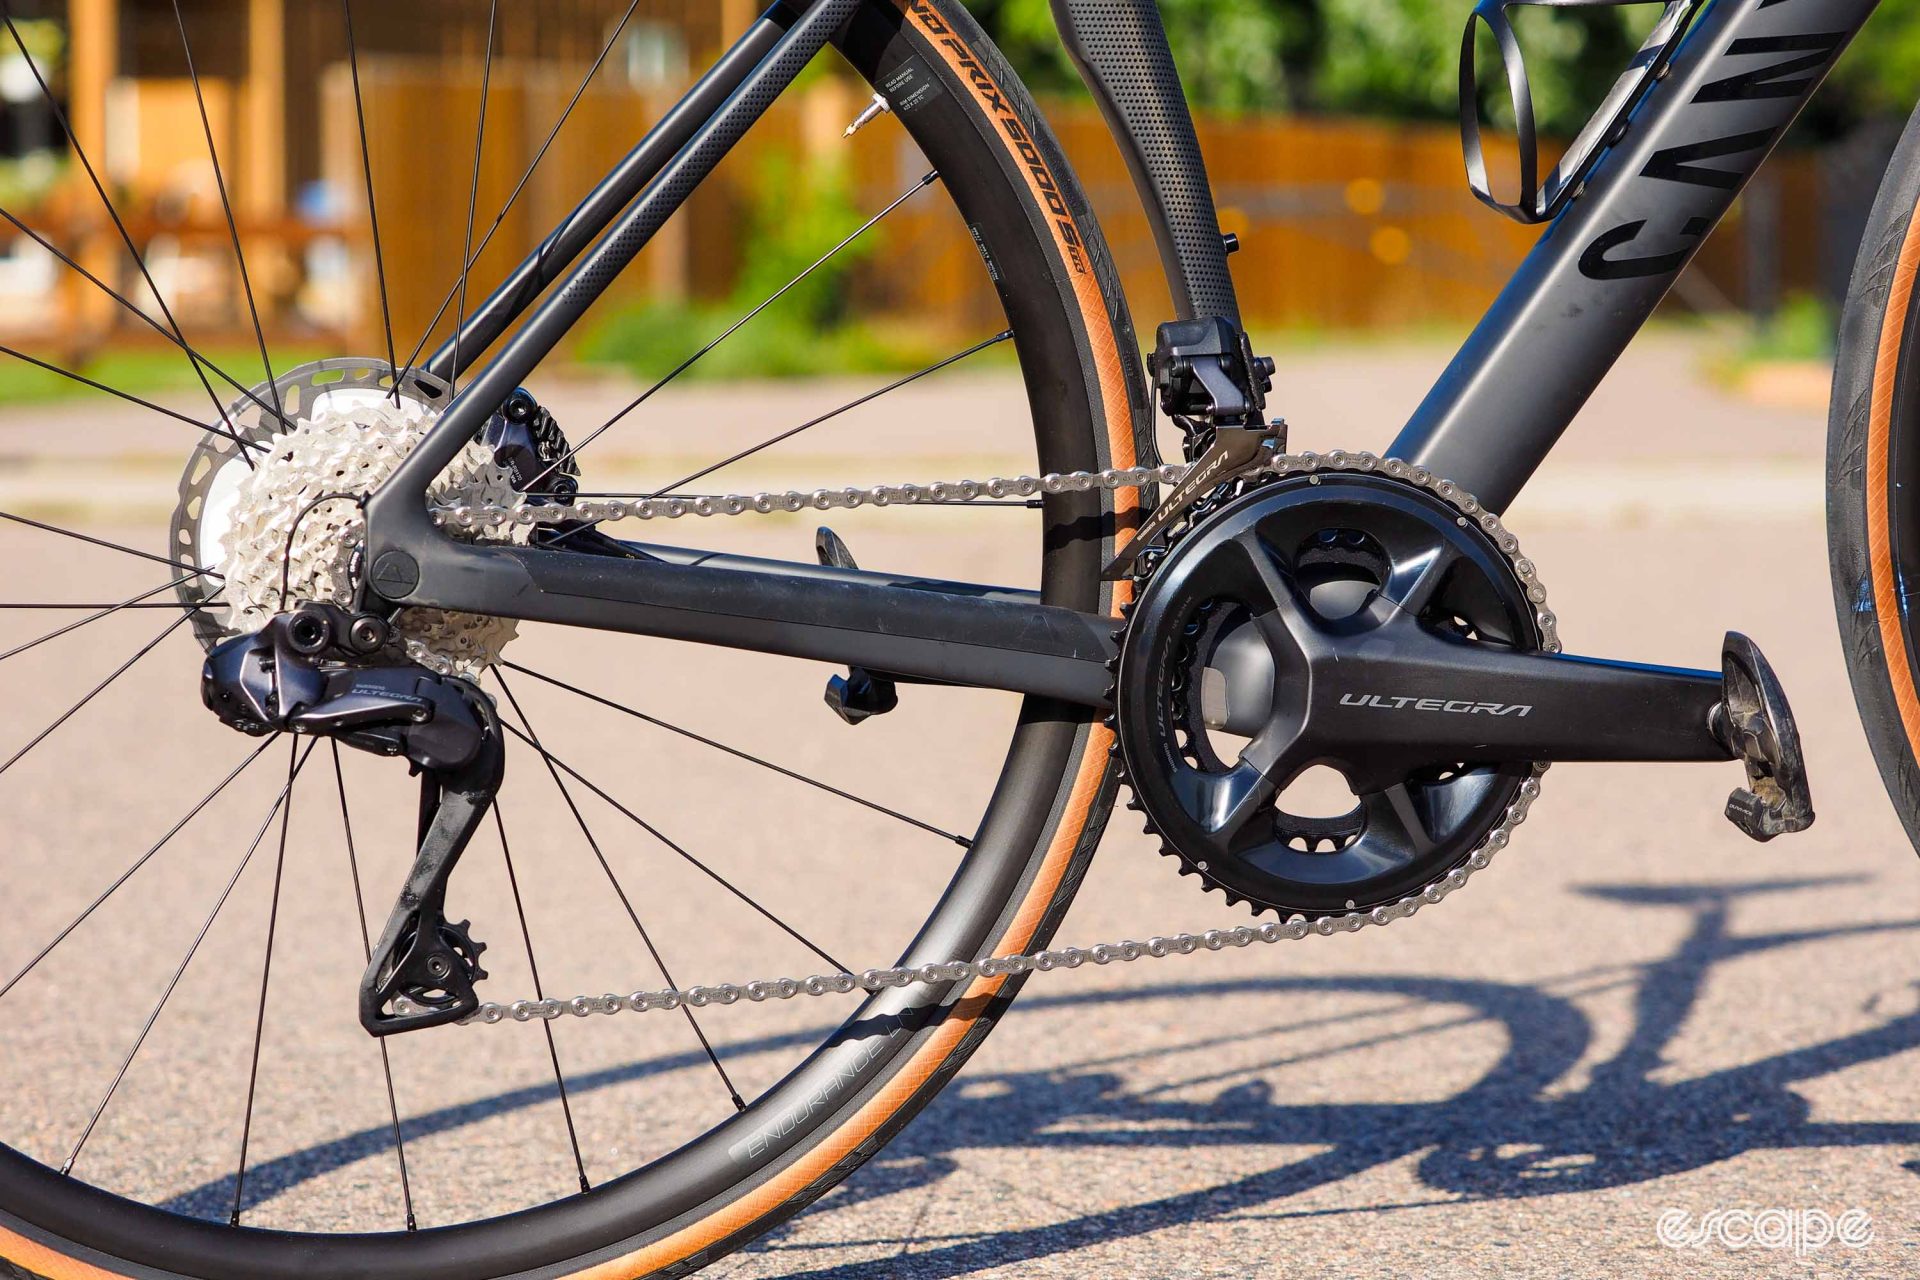 Canyon equips the 2024 Endurace CF with a long-cage rear derailleur to accommodate wide-range gearing.